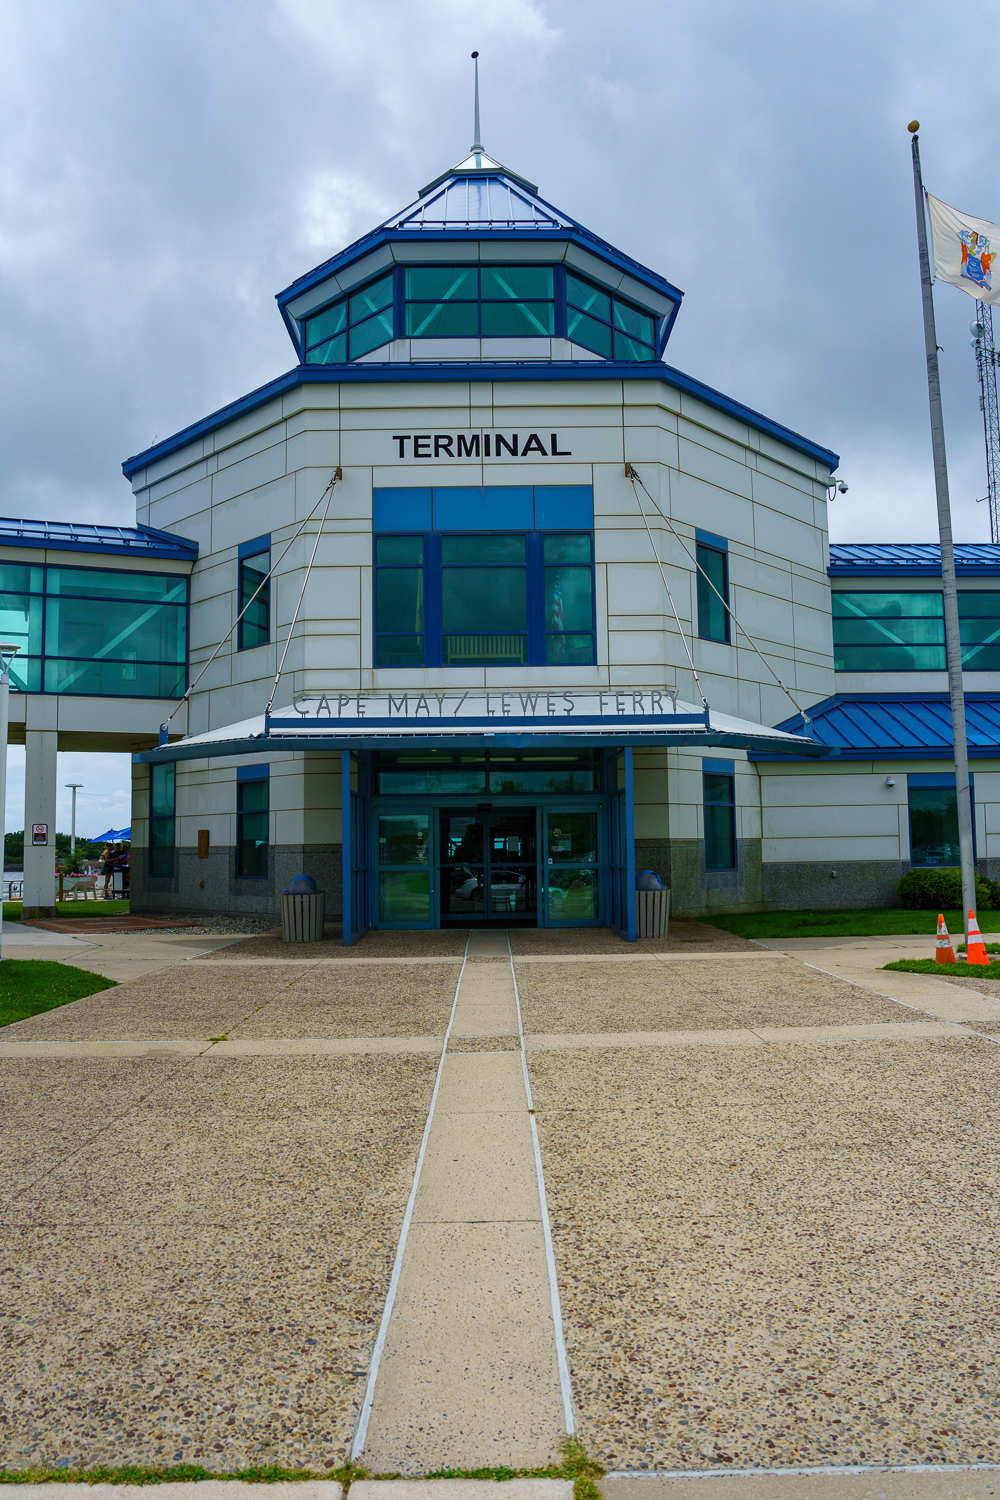 Cape May Ferry Terminal Photo by George Sheldon